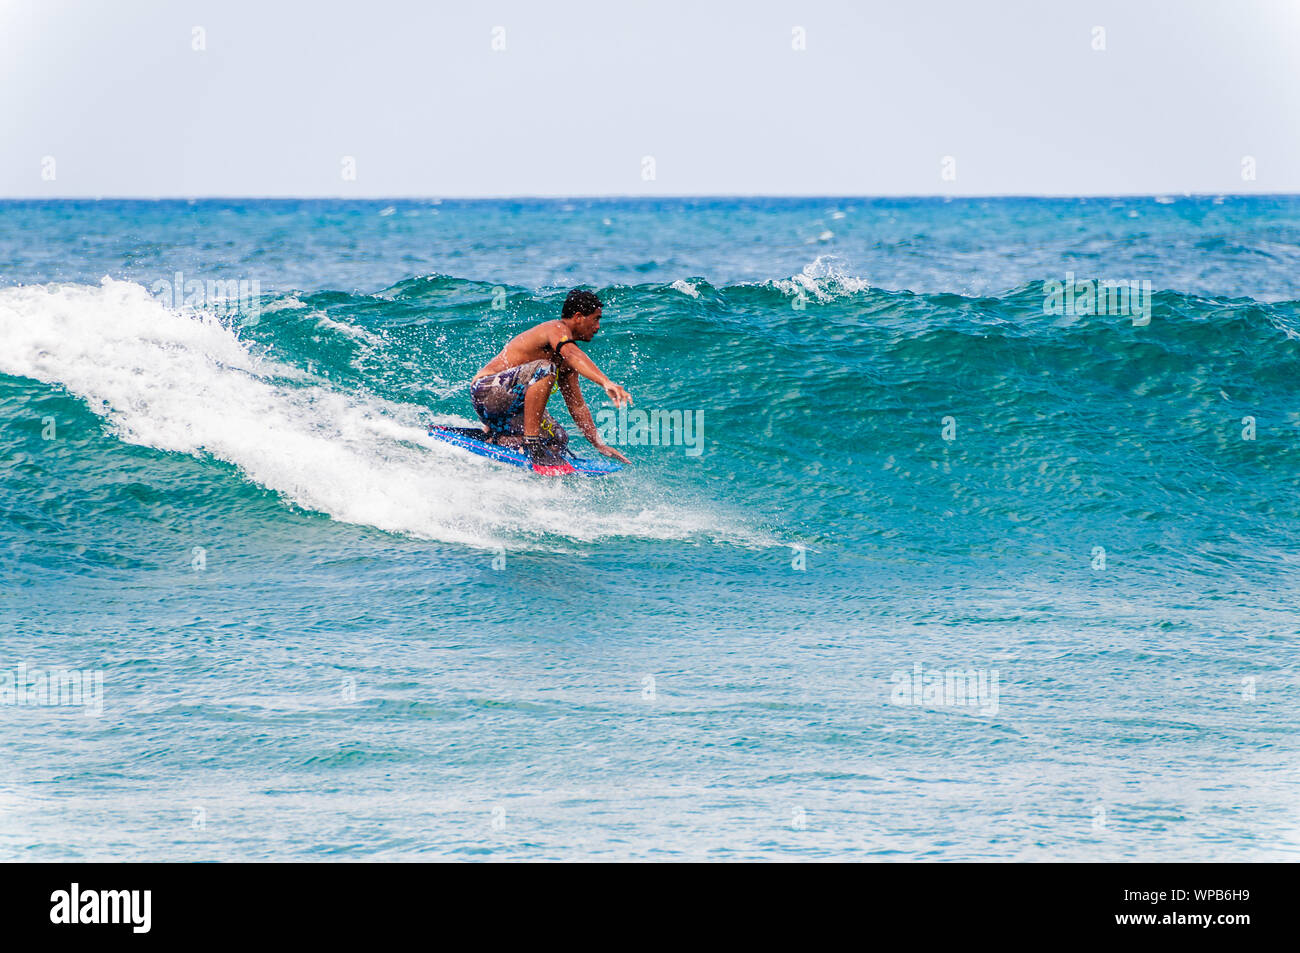 KOLOA, KAUAI, HI - APRIL 24, 2008 - Young man riding a boogie board in a blue wave in the summer. Stock Photo